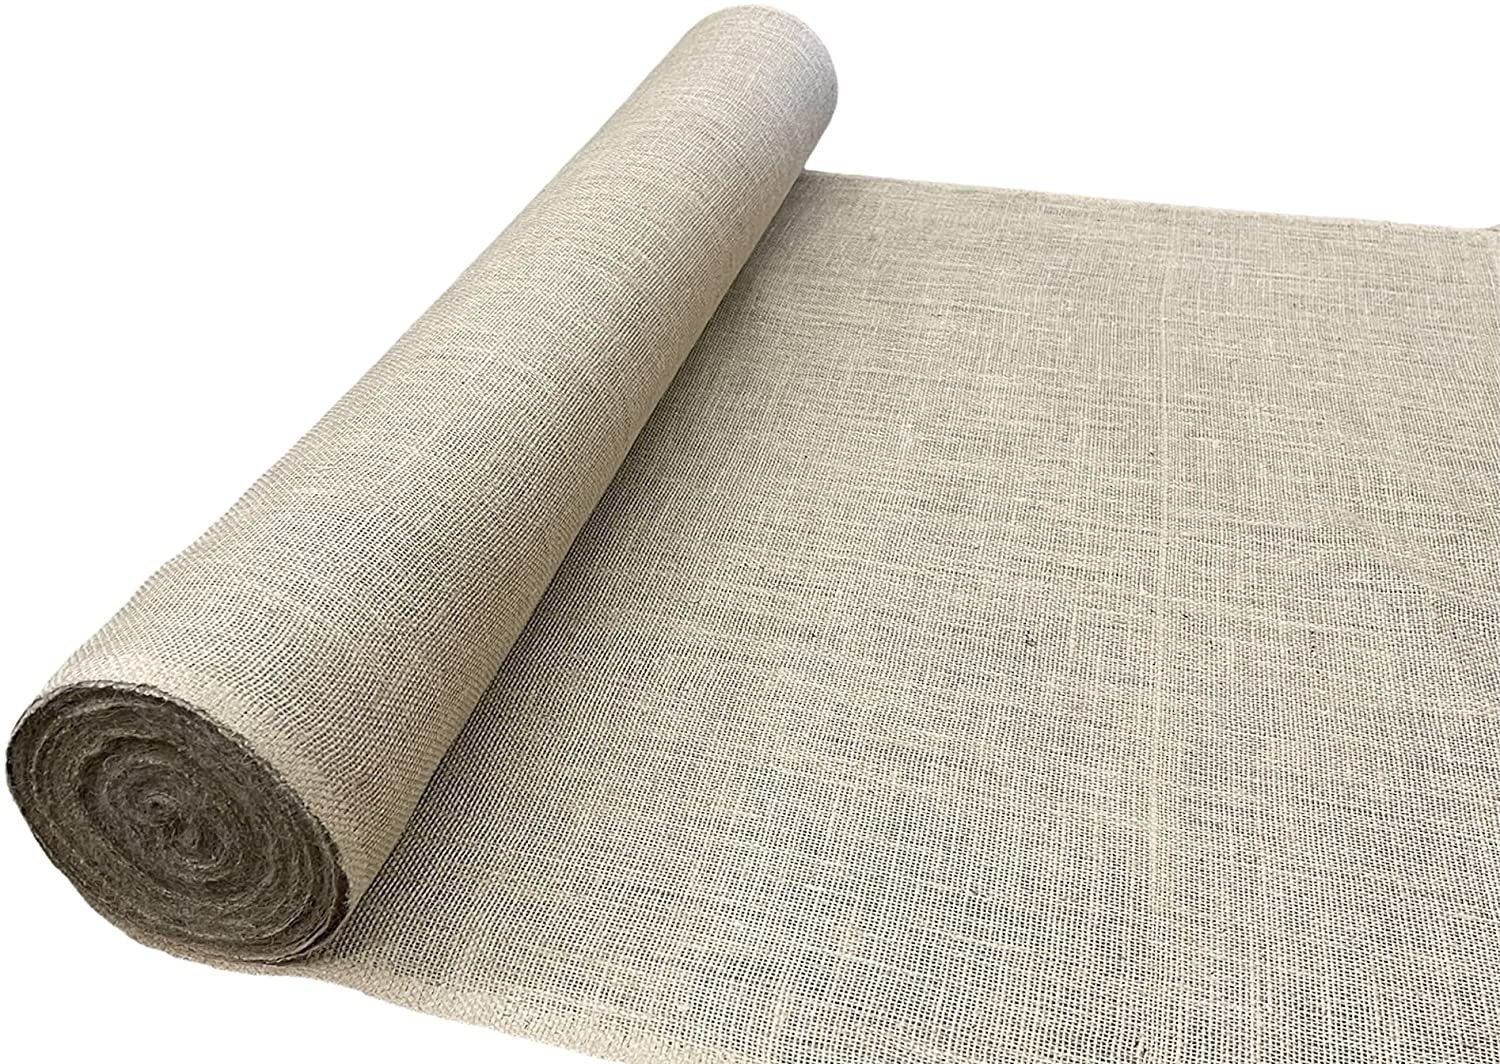 25 Yards 36 Natural Burlap Roll Finished Edges Eco-friendly Natural Jute  Burlap Fabric 36 Inch Wide 